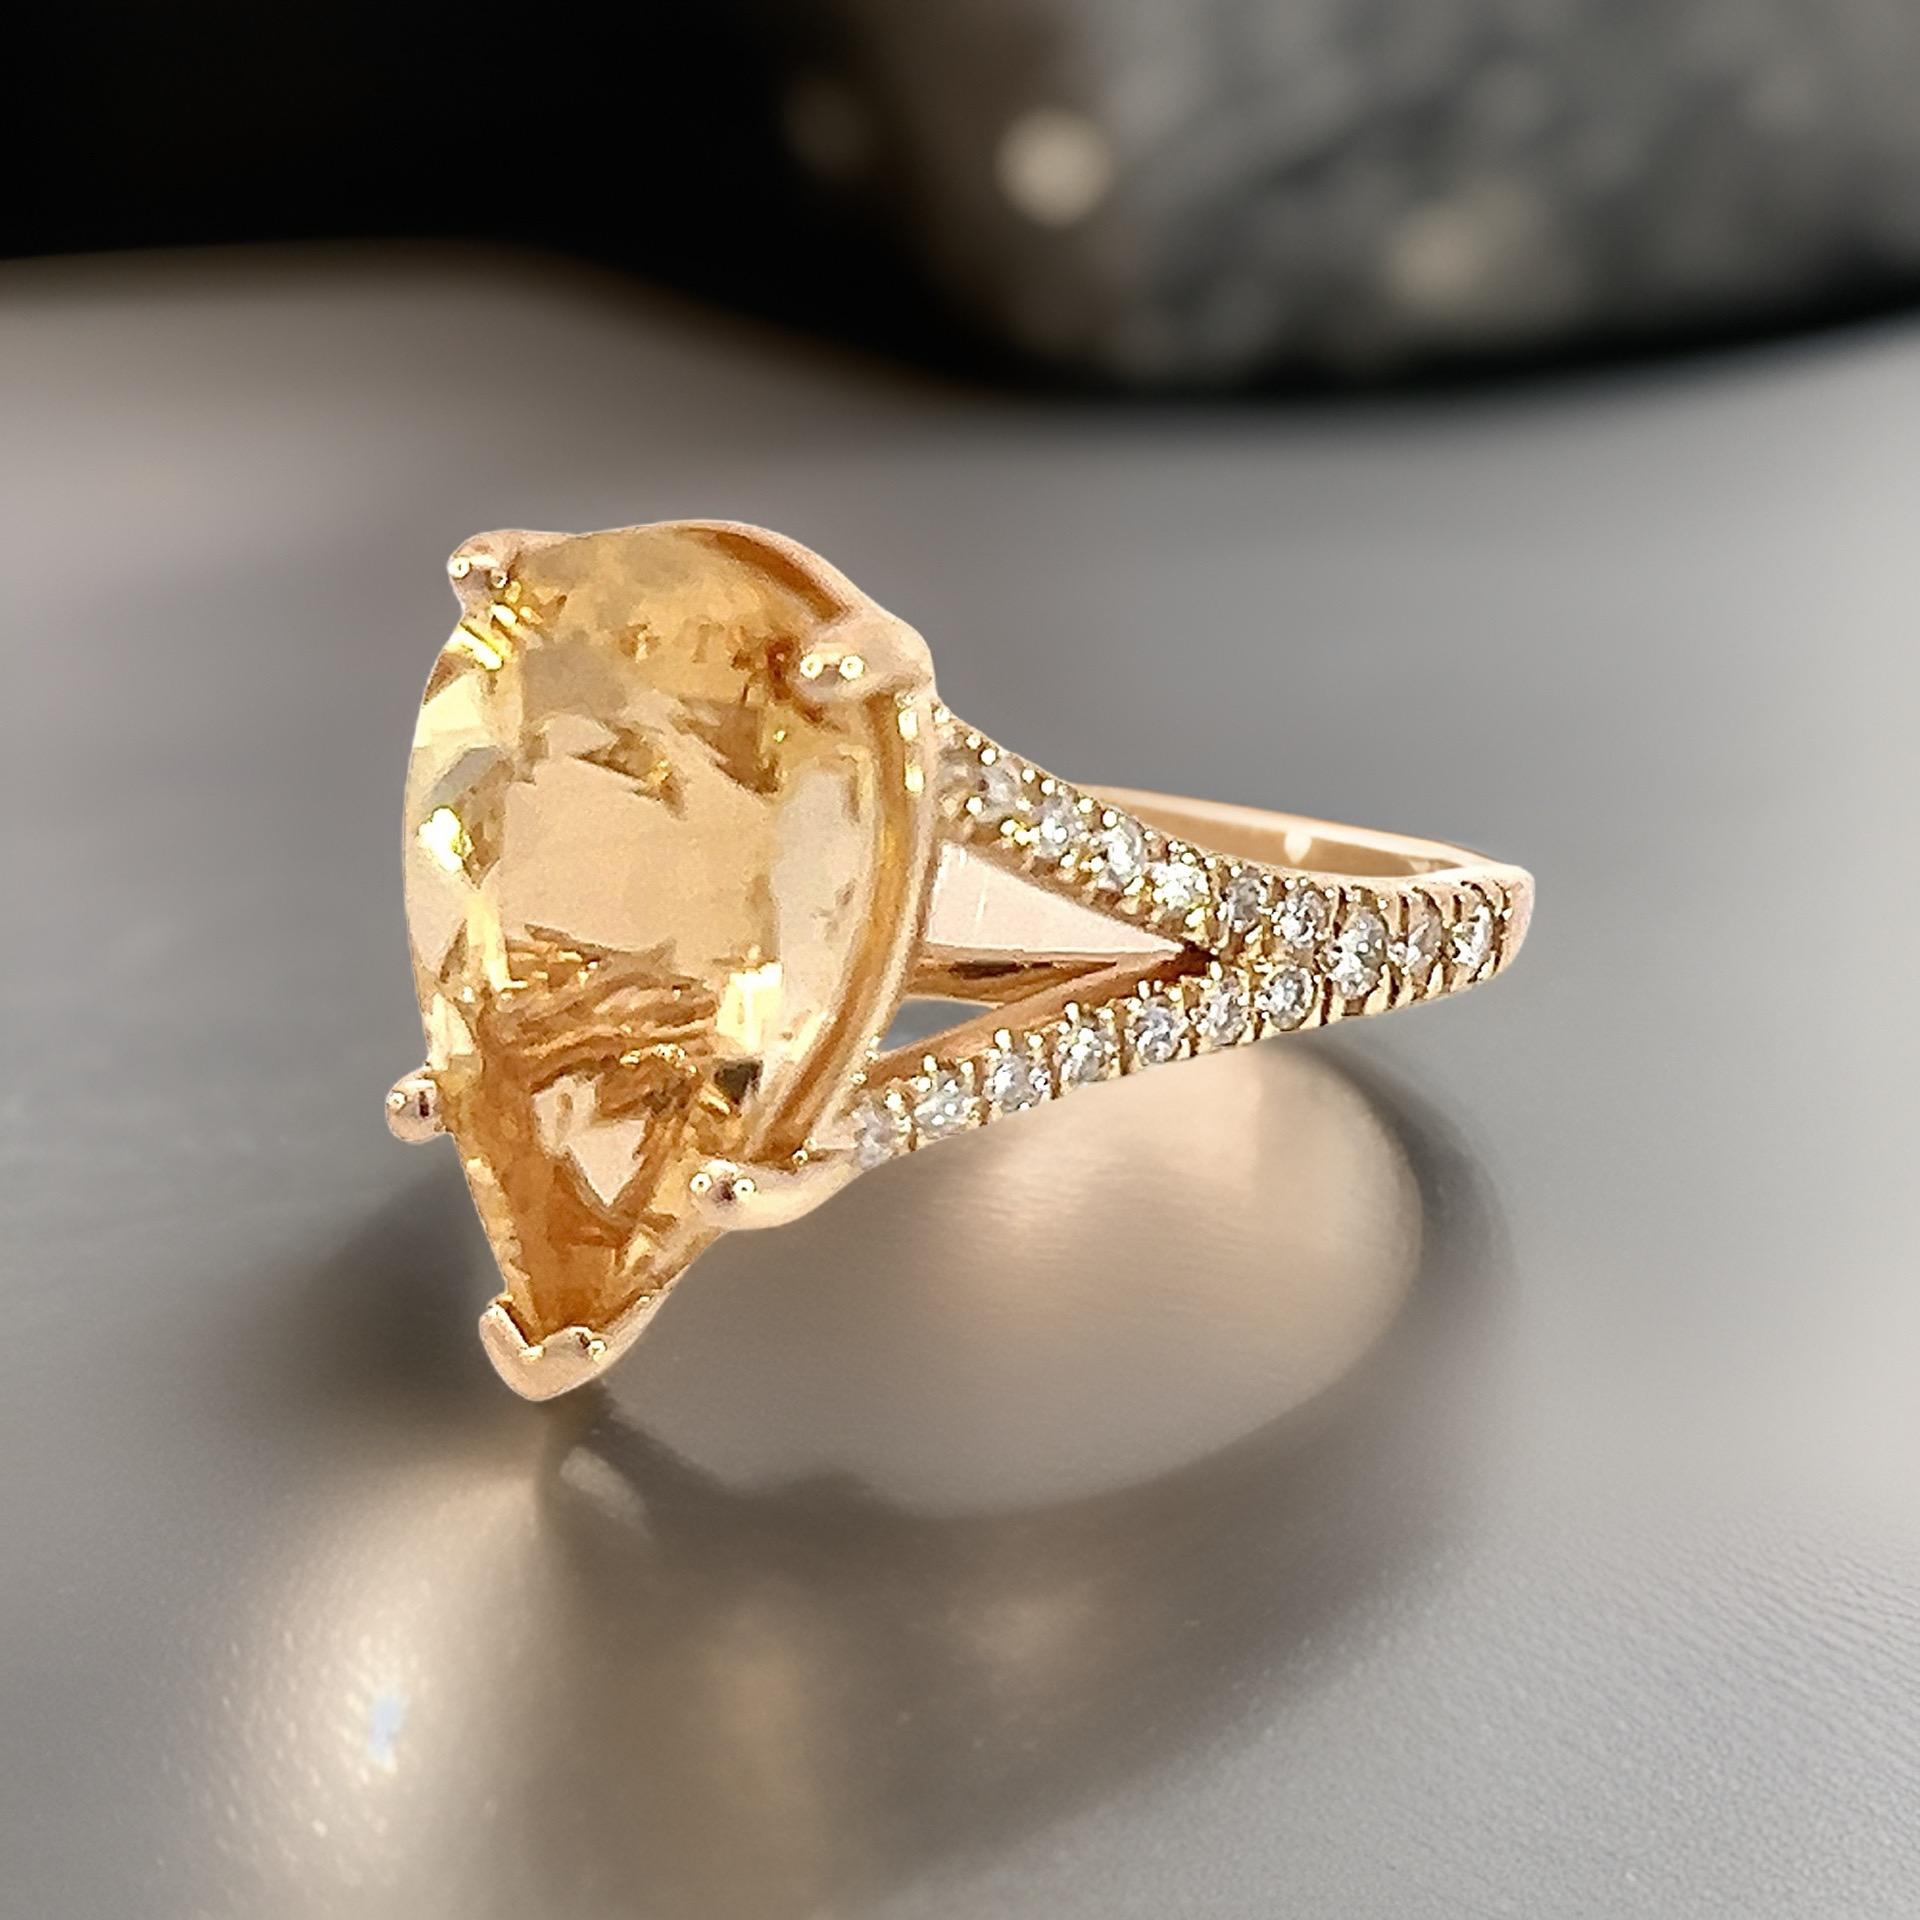 Natural Citrine Diamond Ring 6.5 14k Y Gold 4.79 TCW Certified For Sale 10